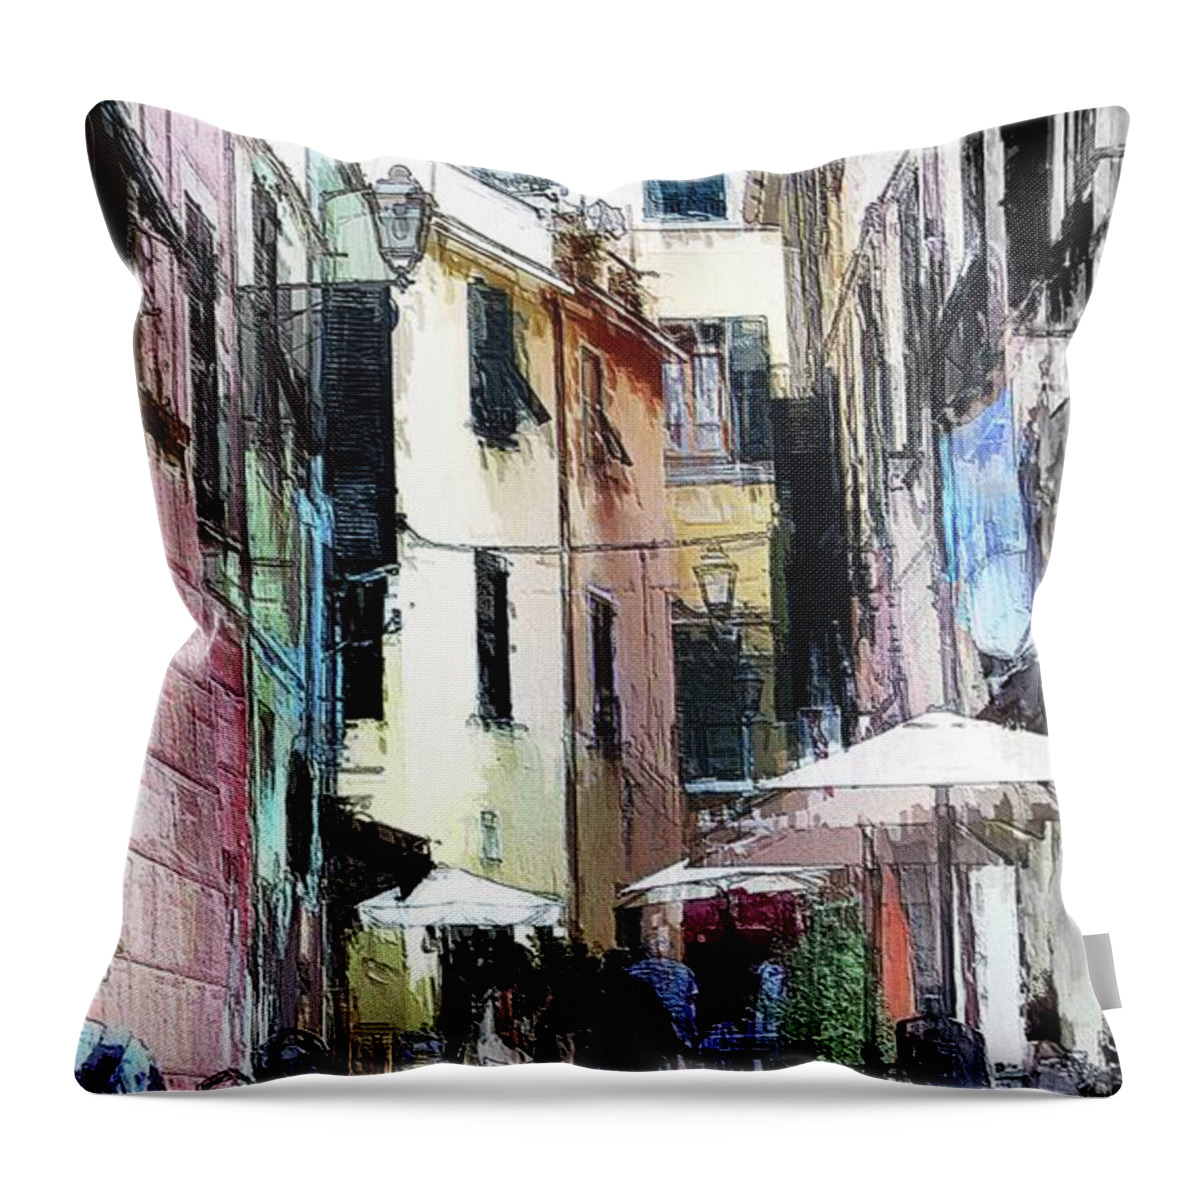 Monterosso Italy Throw Pillow featuring the digital art Colors of Monterosso by Looking Glass Images